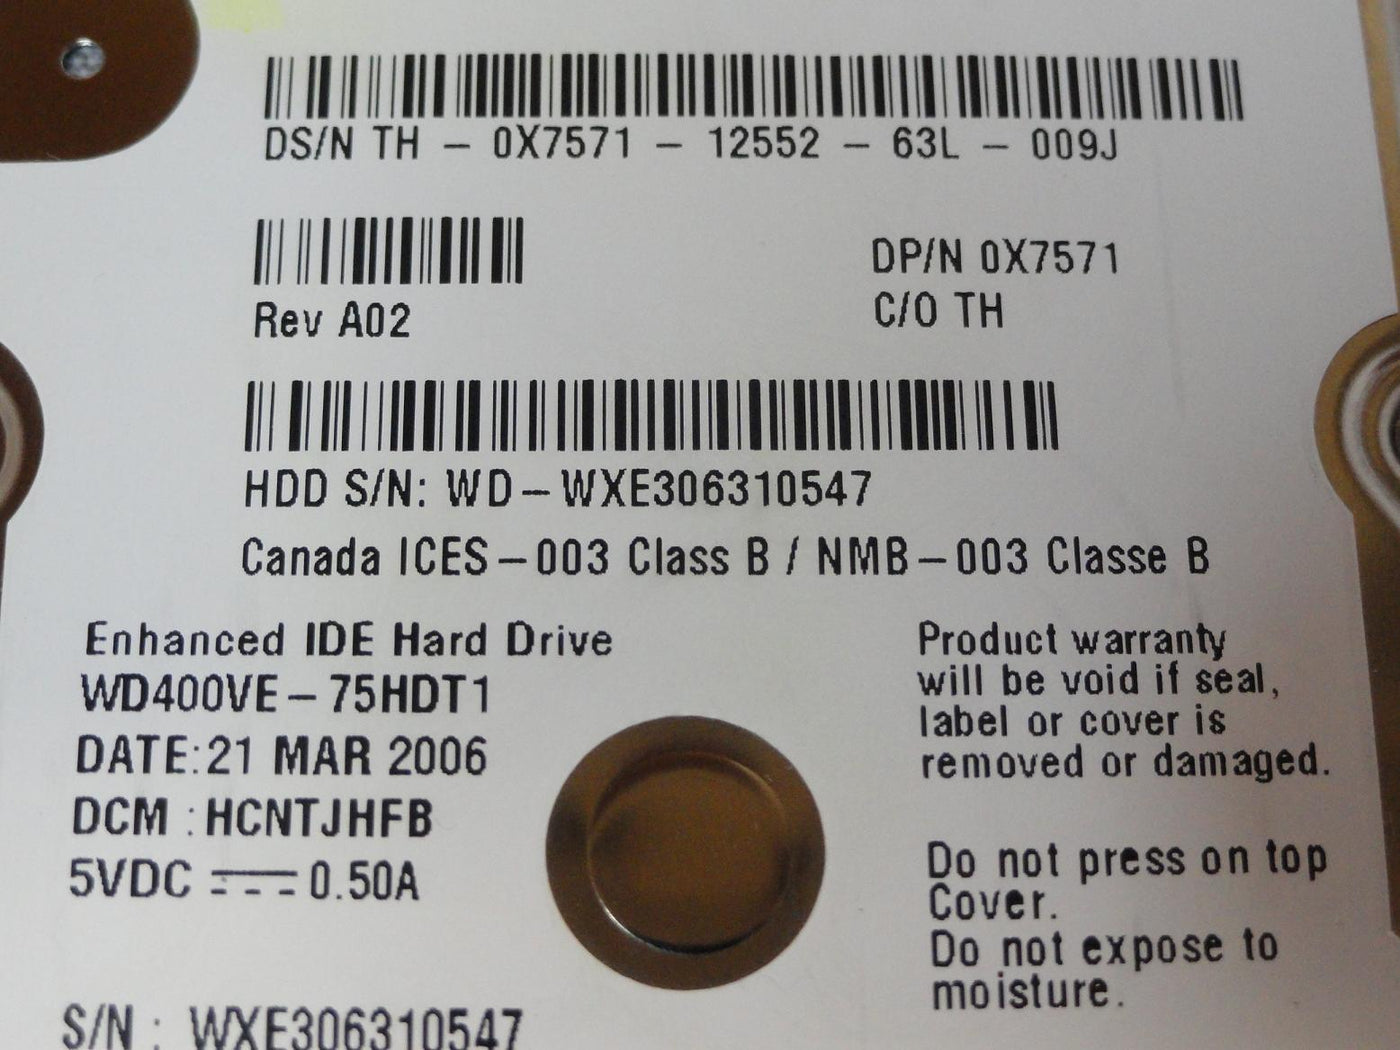 MC3104_WD400VE-75HDT1_Western Digital Dell 40GB IDE 5400Rpm 2.5in HDD - Image3